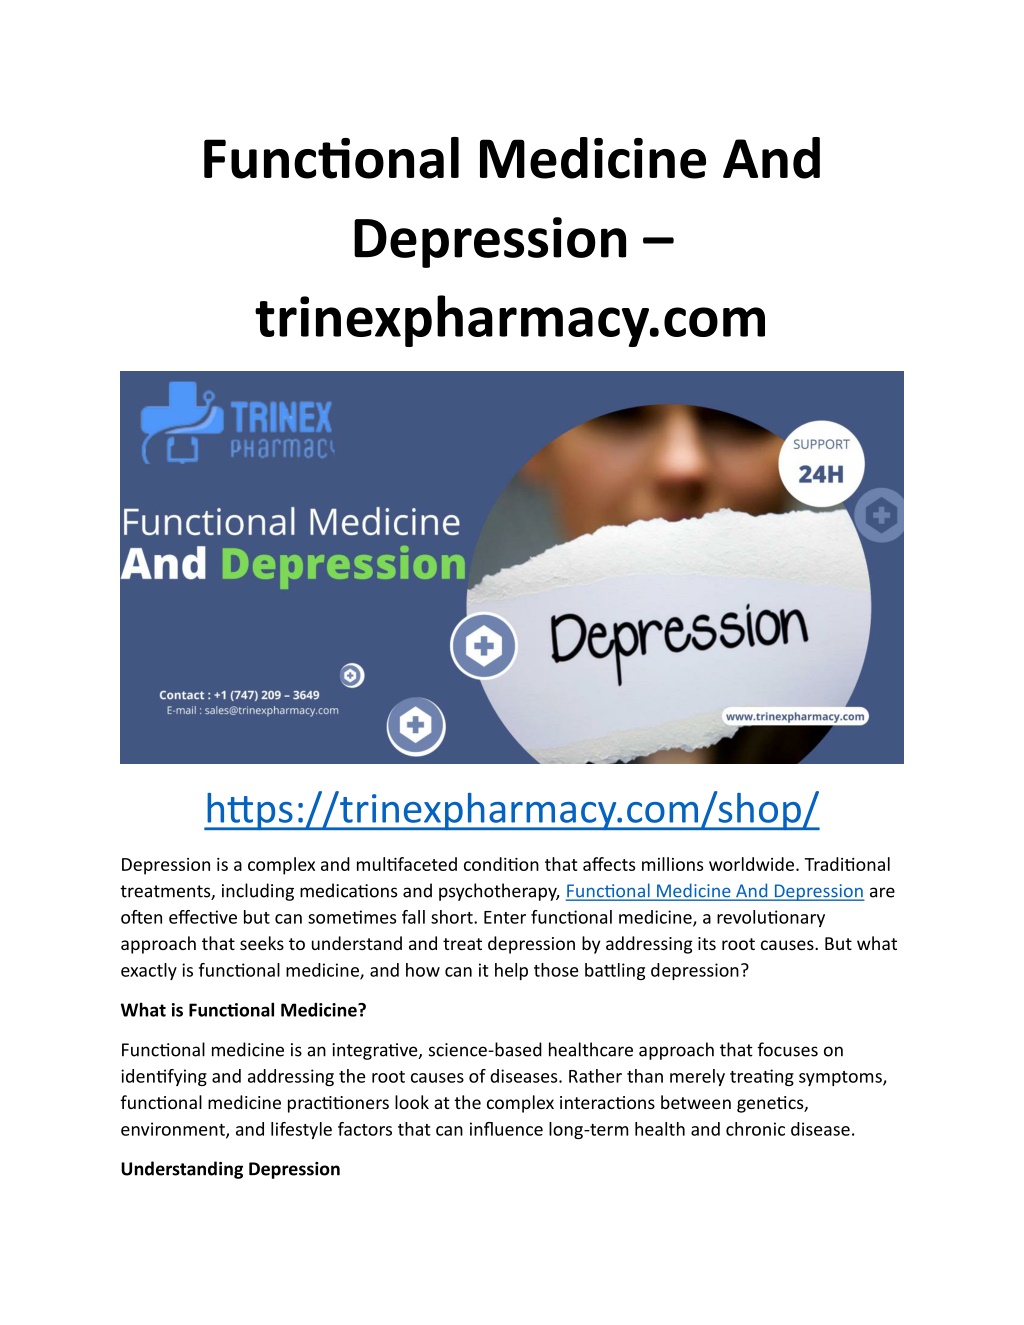 functional medicine and depression trinexpharmacy l.w